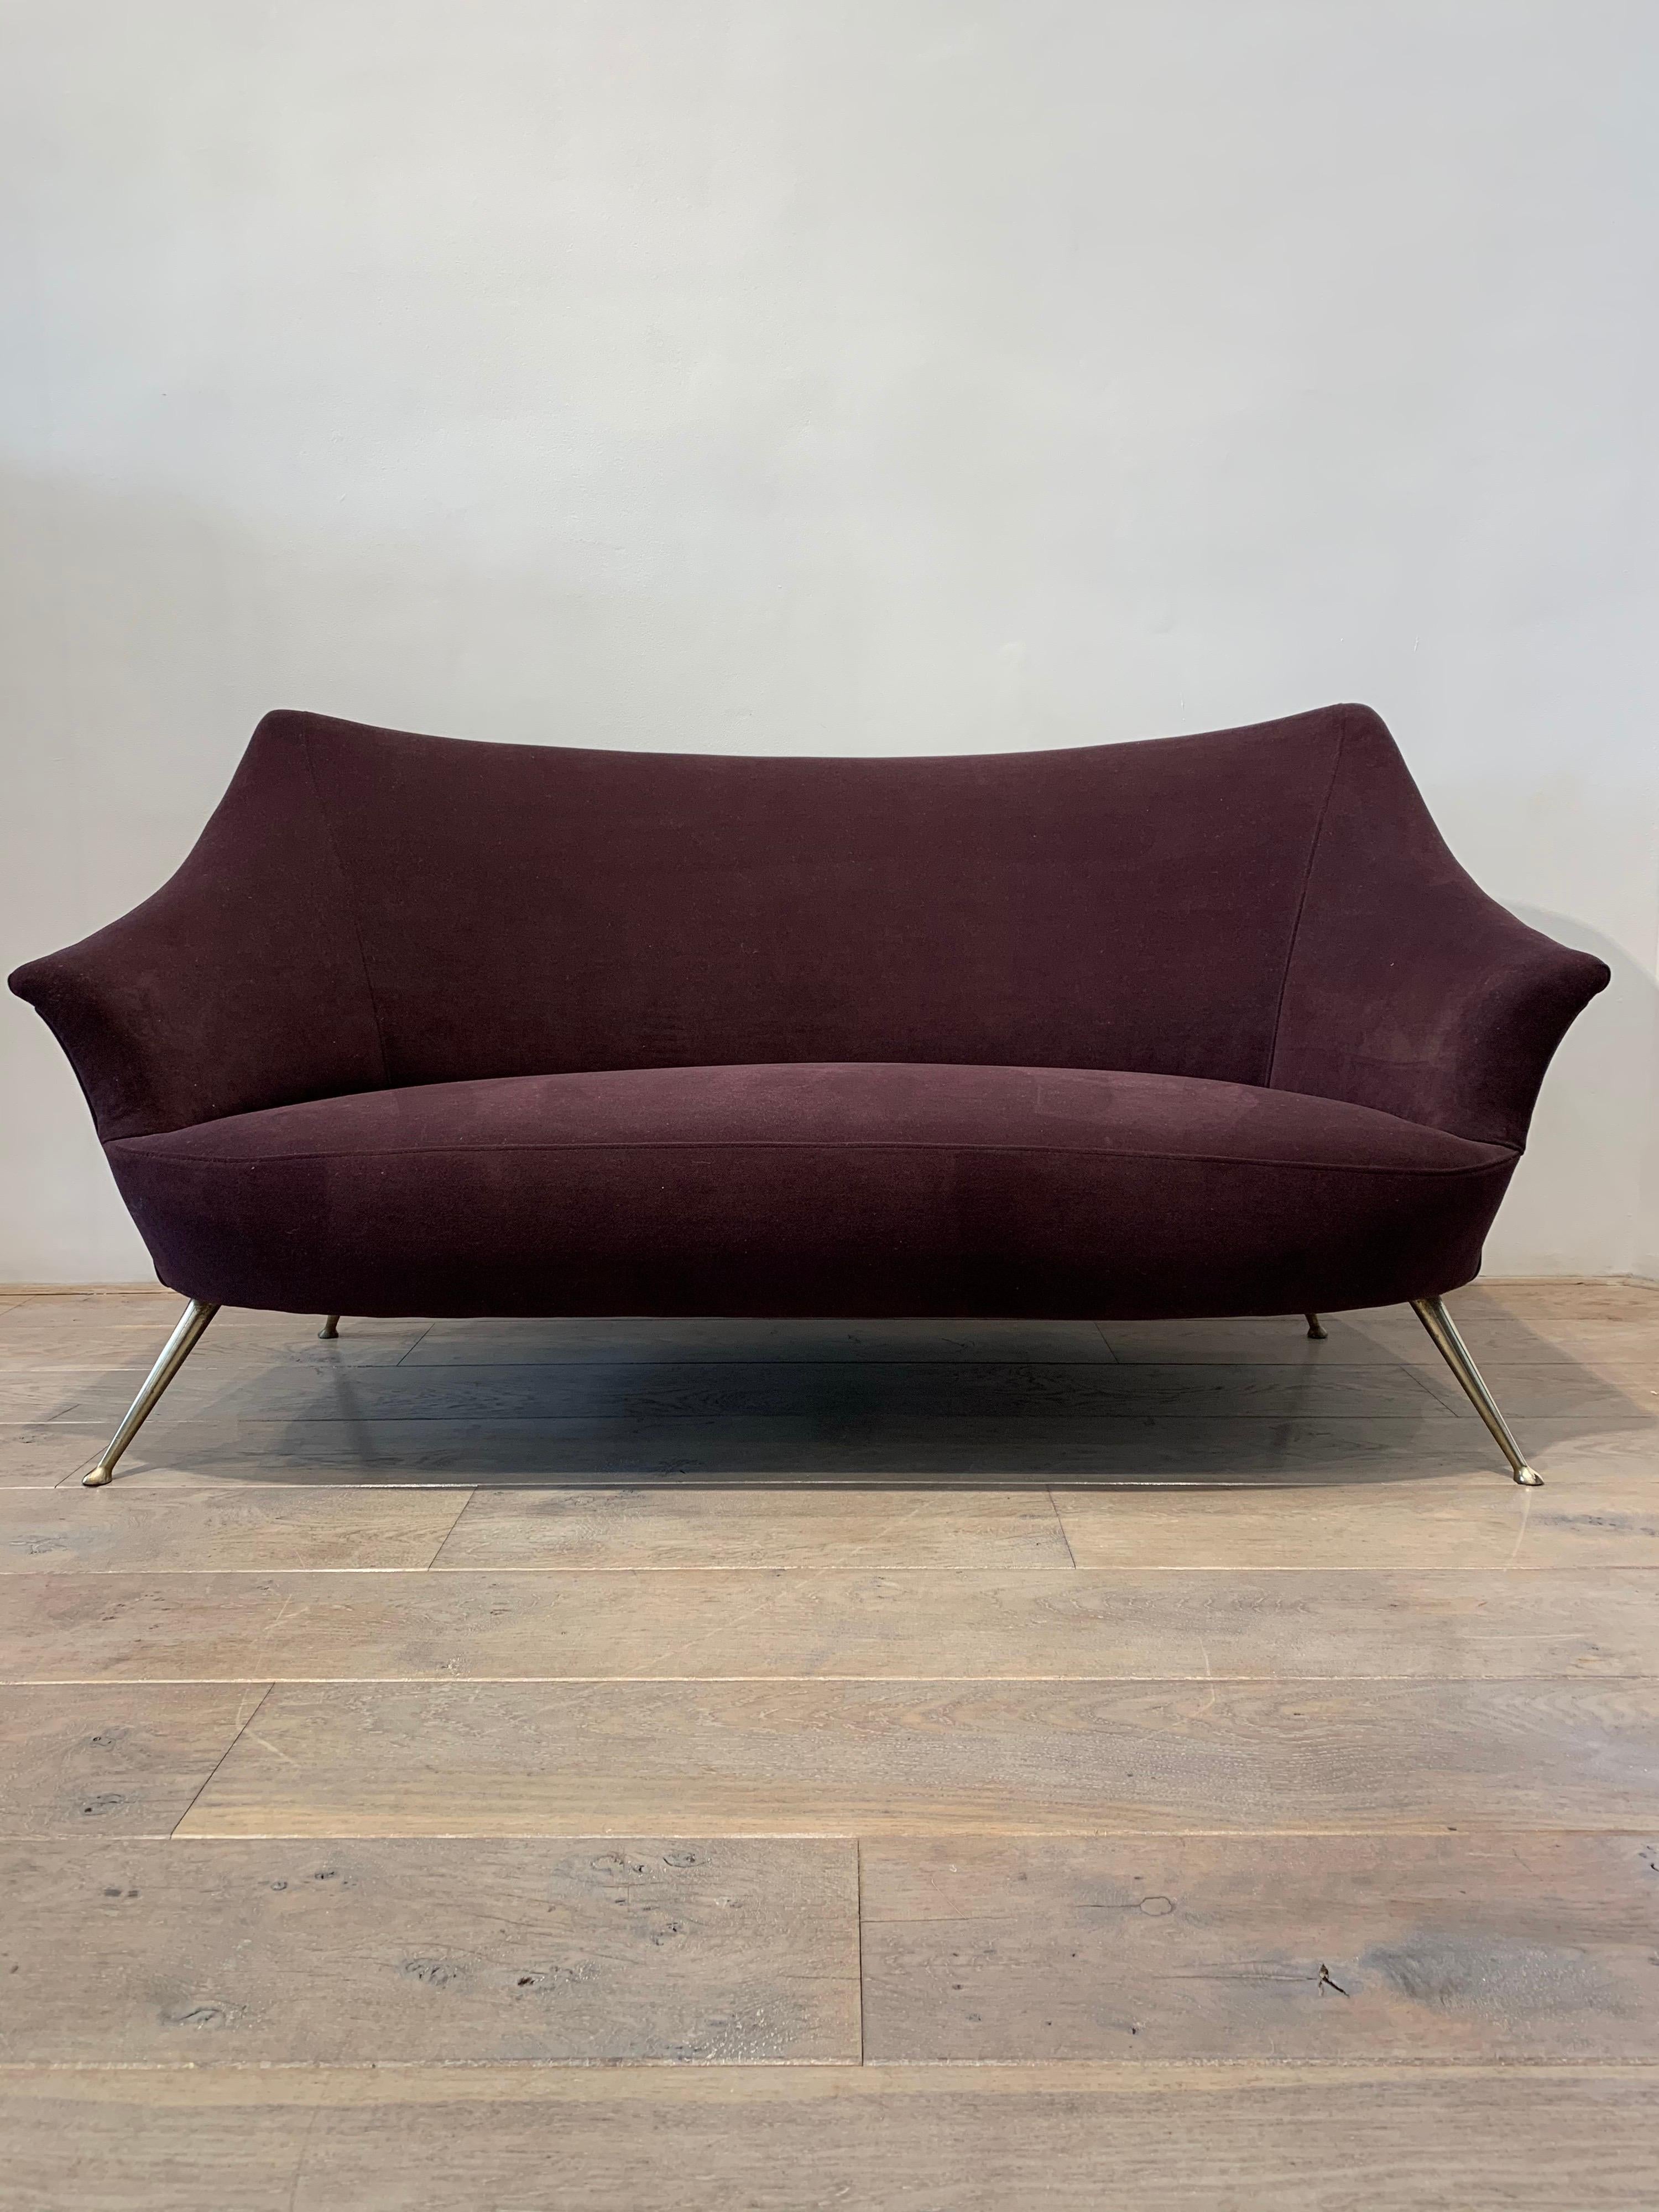 Isa Bergamo is a manufacturer which produced quality furniture in the 1950s. Please note that the velvet is new.